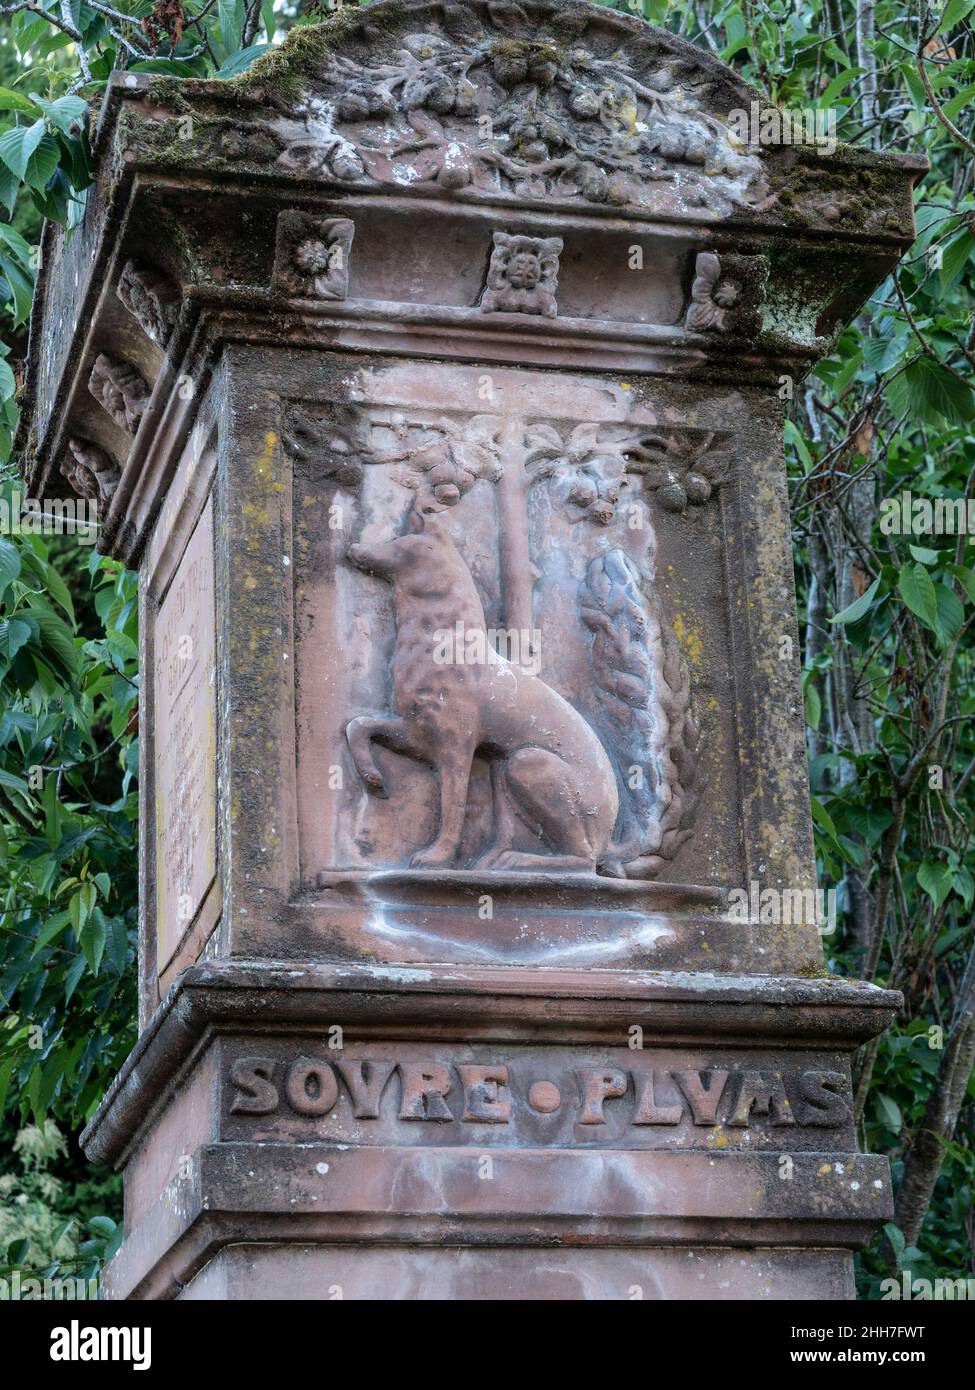 Galashiels, Selkirkshire, Scotland - gate pillar in the town centre with coat of arms and 'Soure Plums' (soor plooms, sour plums) motto. Stock Photo